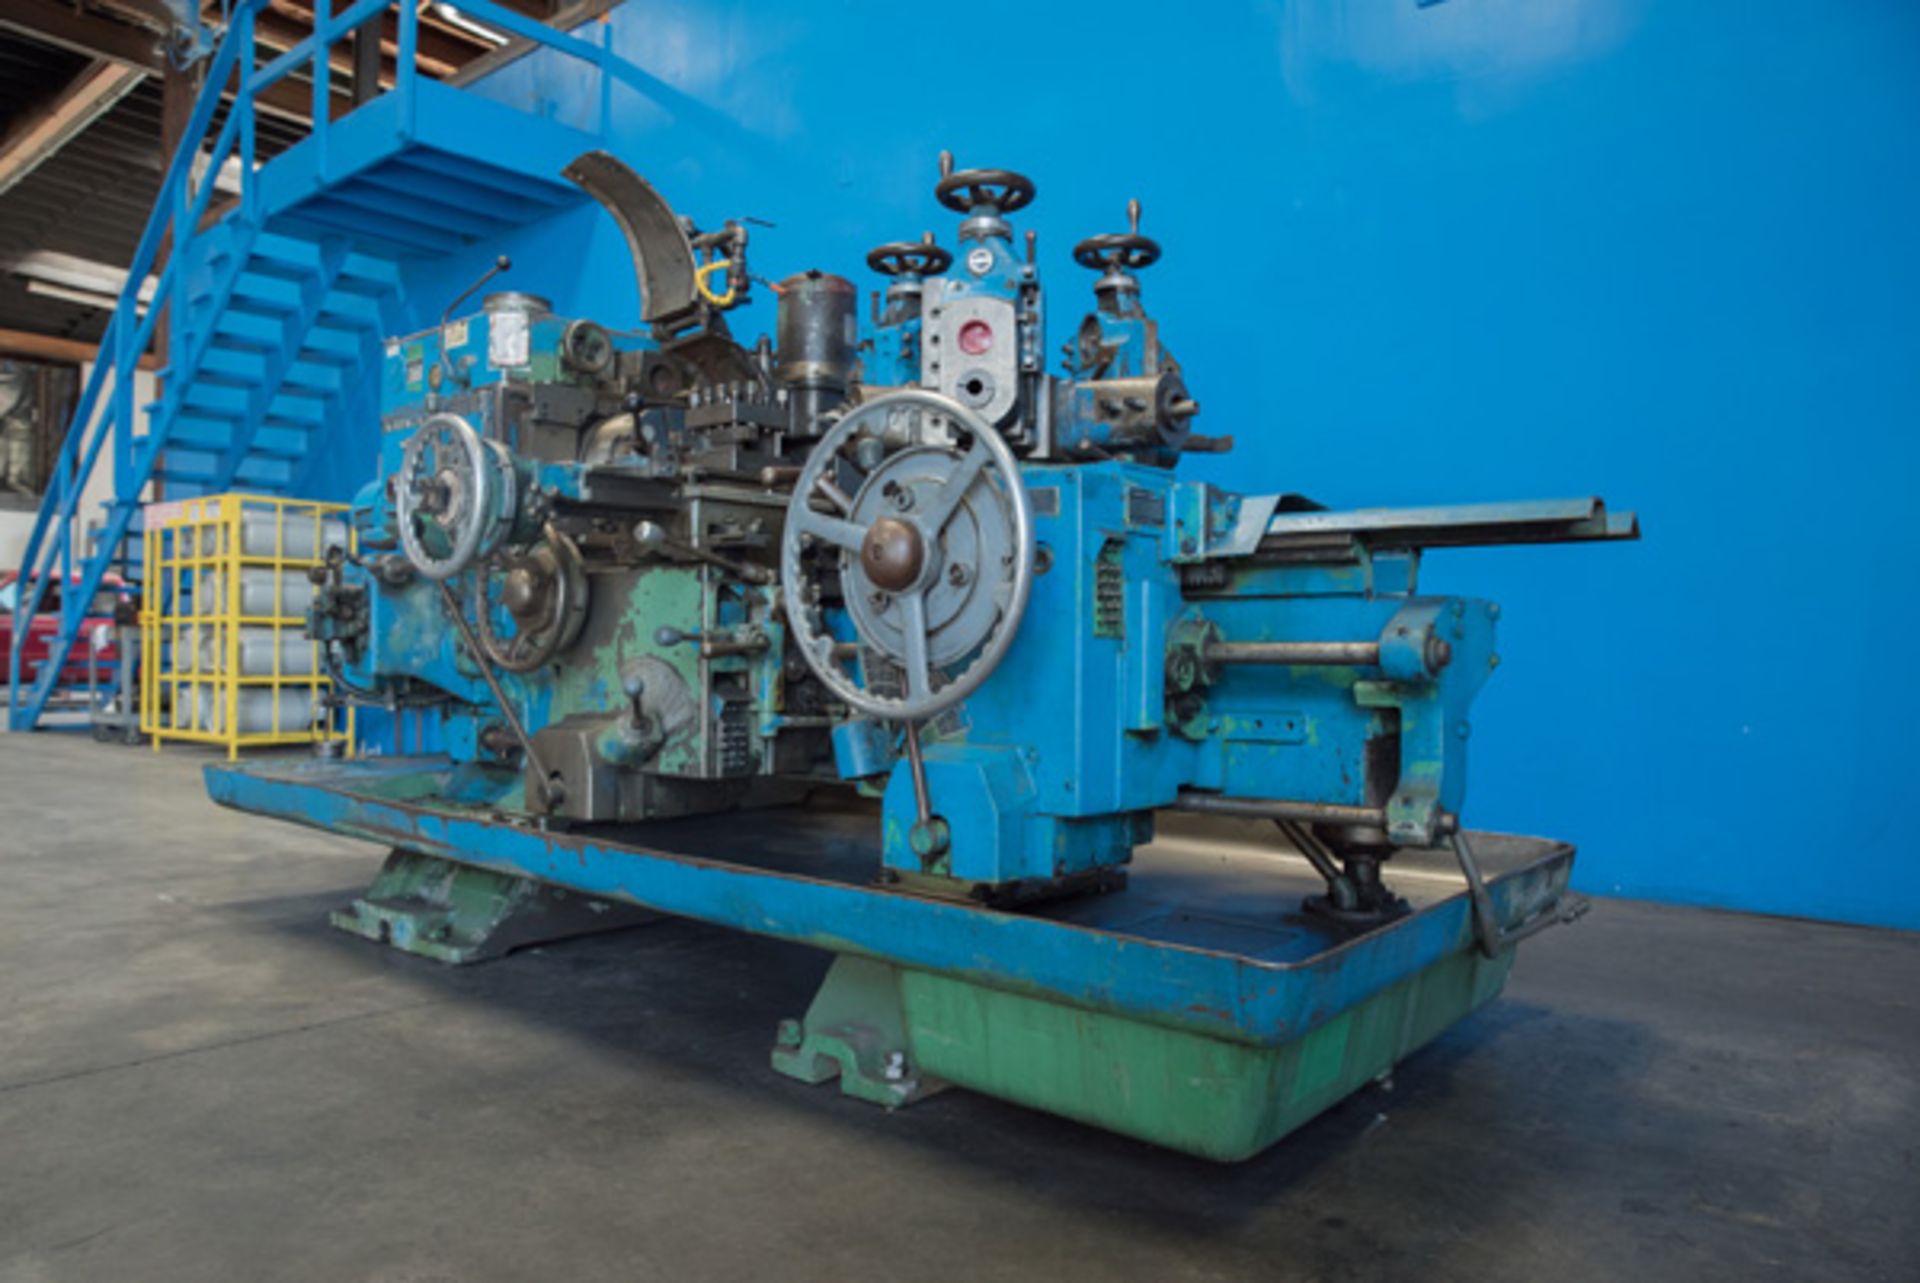 Warner & Swasey Turret Lathe | 18" x 32", Located In: Huntington Park, CA - 4552 - Image 10 of 14